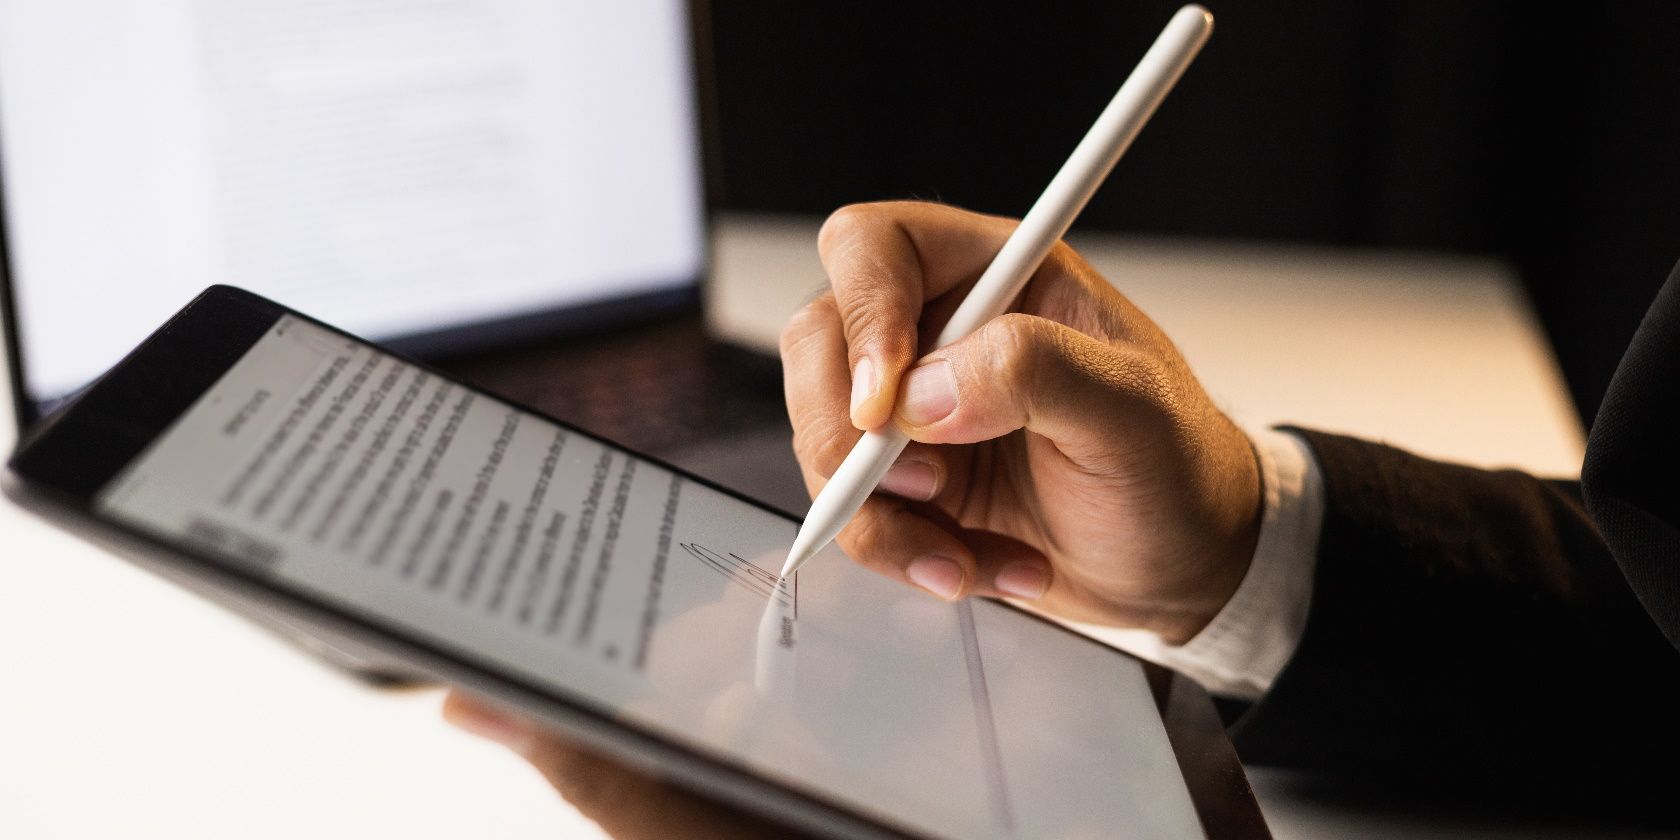 The Top 10 Best E-Notes and Writing Tablets for 2021 - Good e-Reader